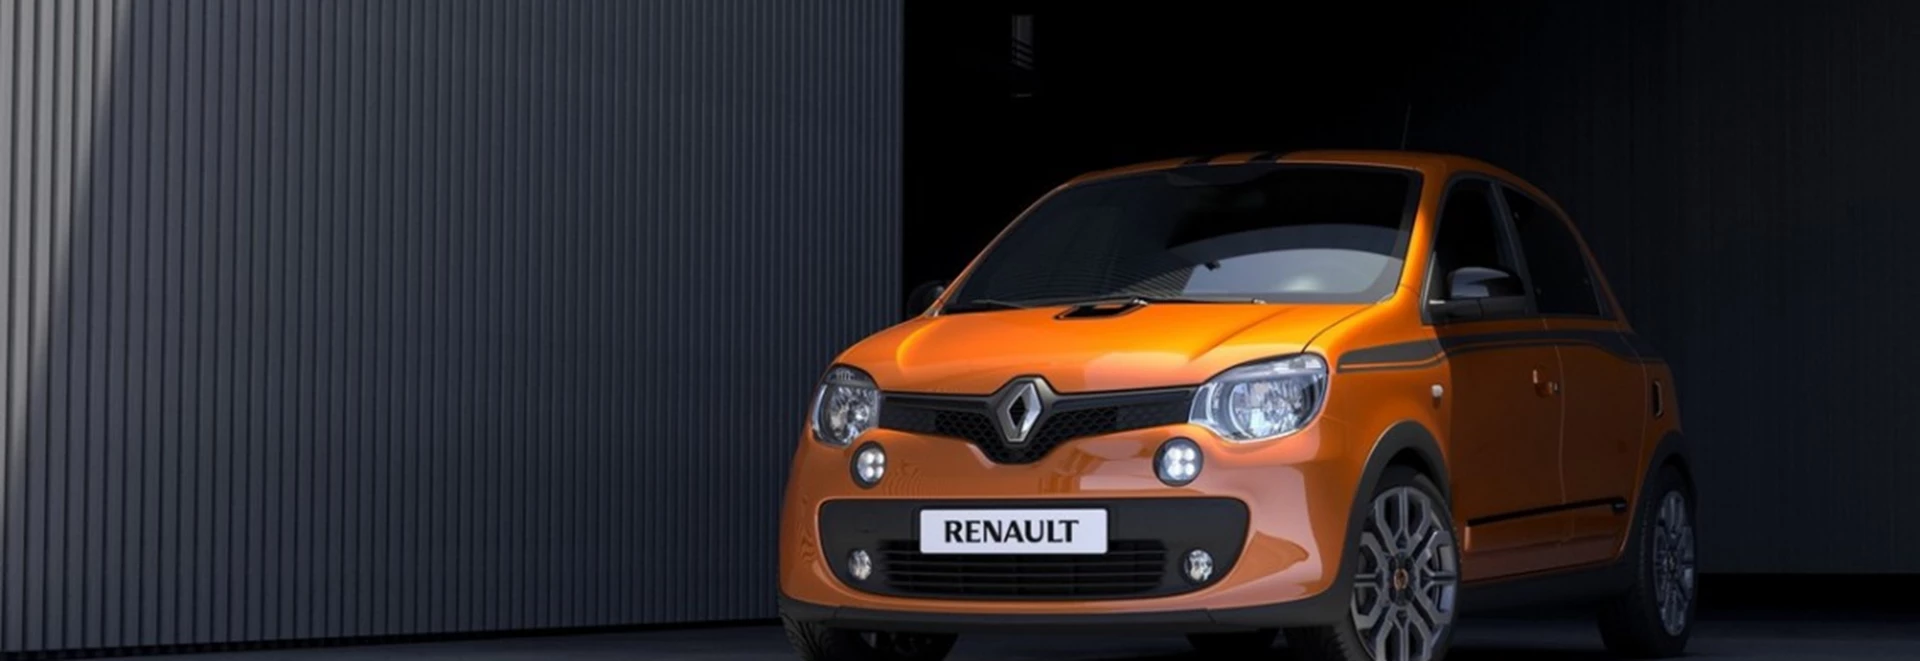 Hot Renaultsport Twingo “almost impossible”, Renault says